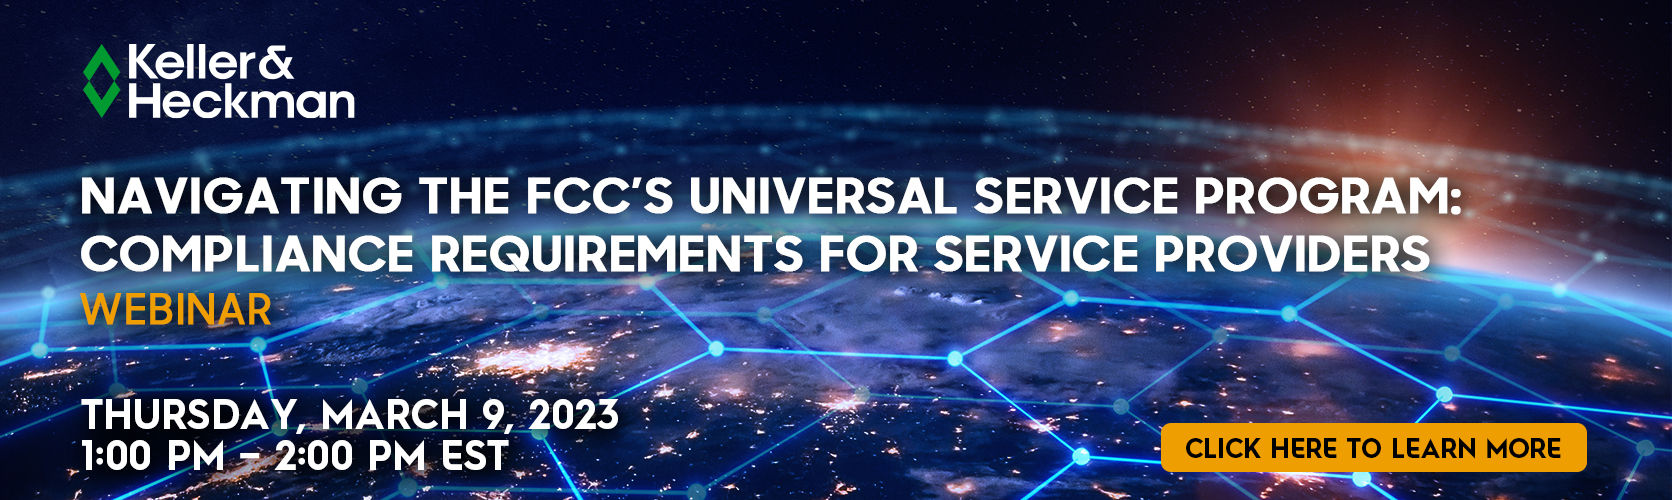 navigating-the-fcc-s-universal-service-program-compliance-requirements